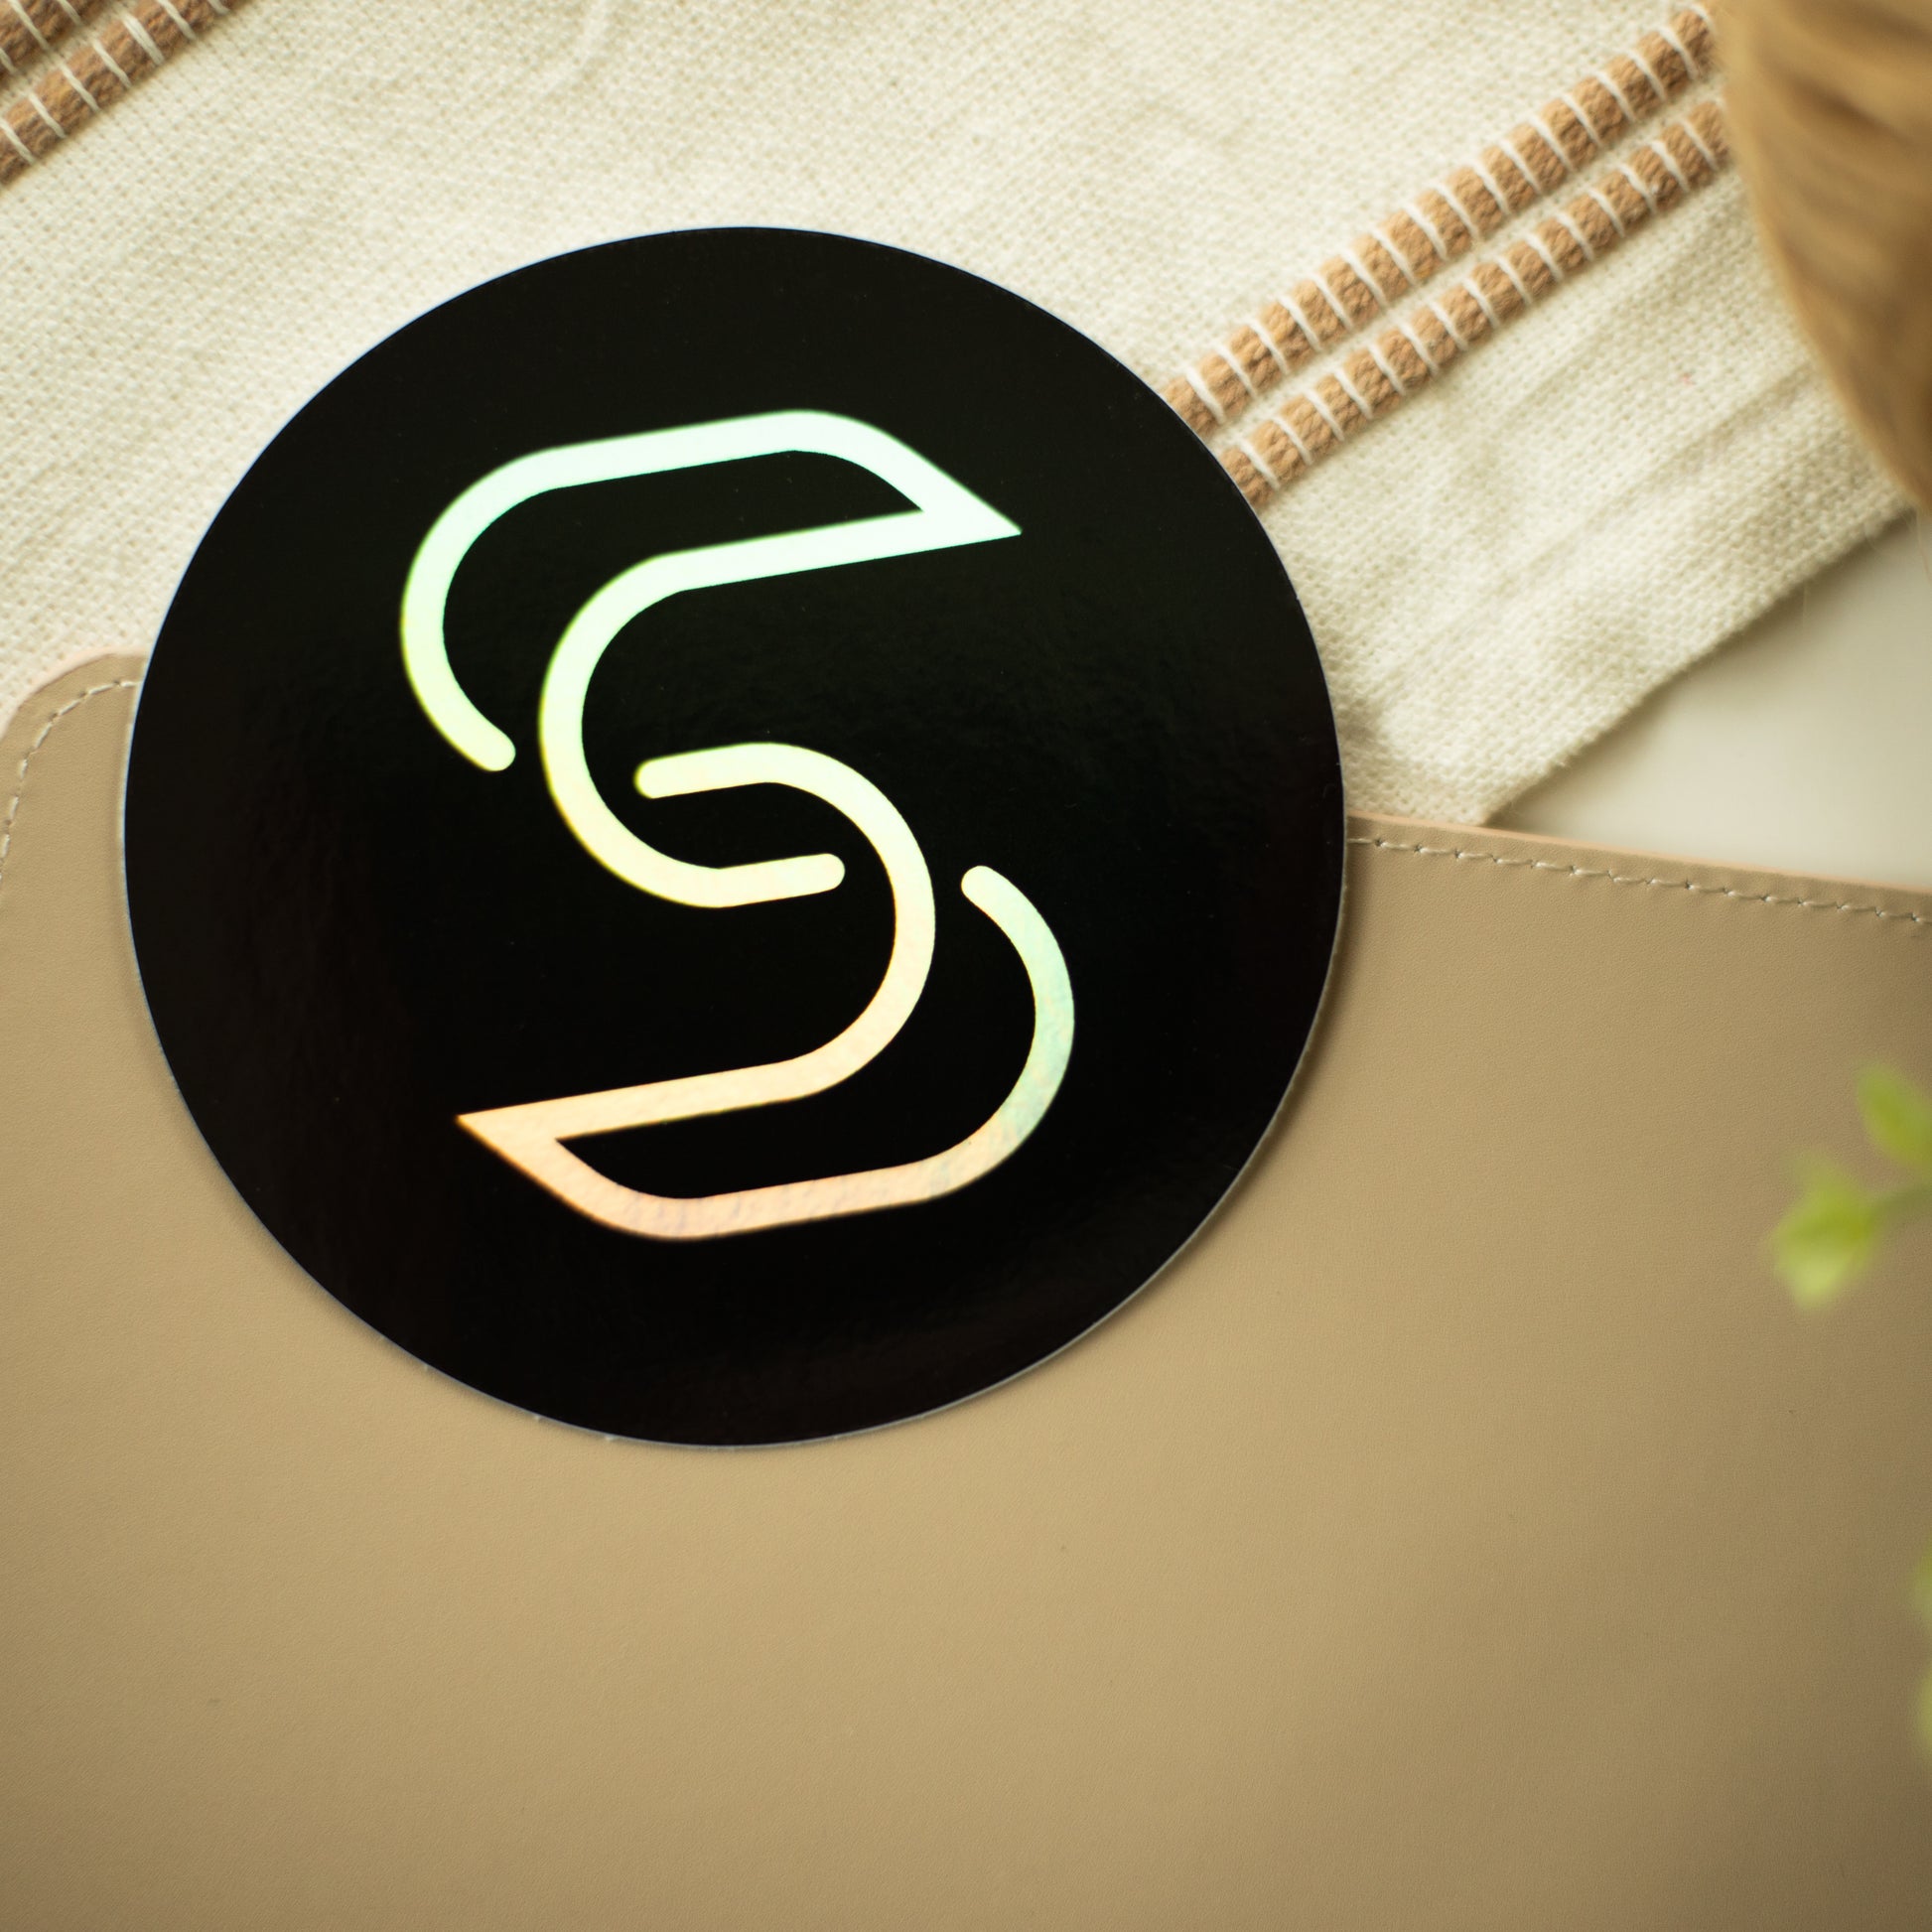 Holographic STICKR logo on table